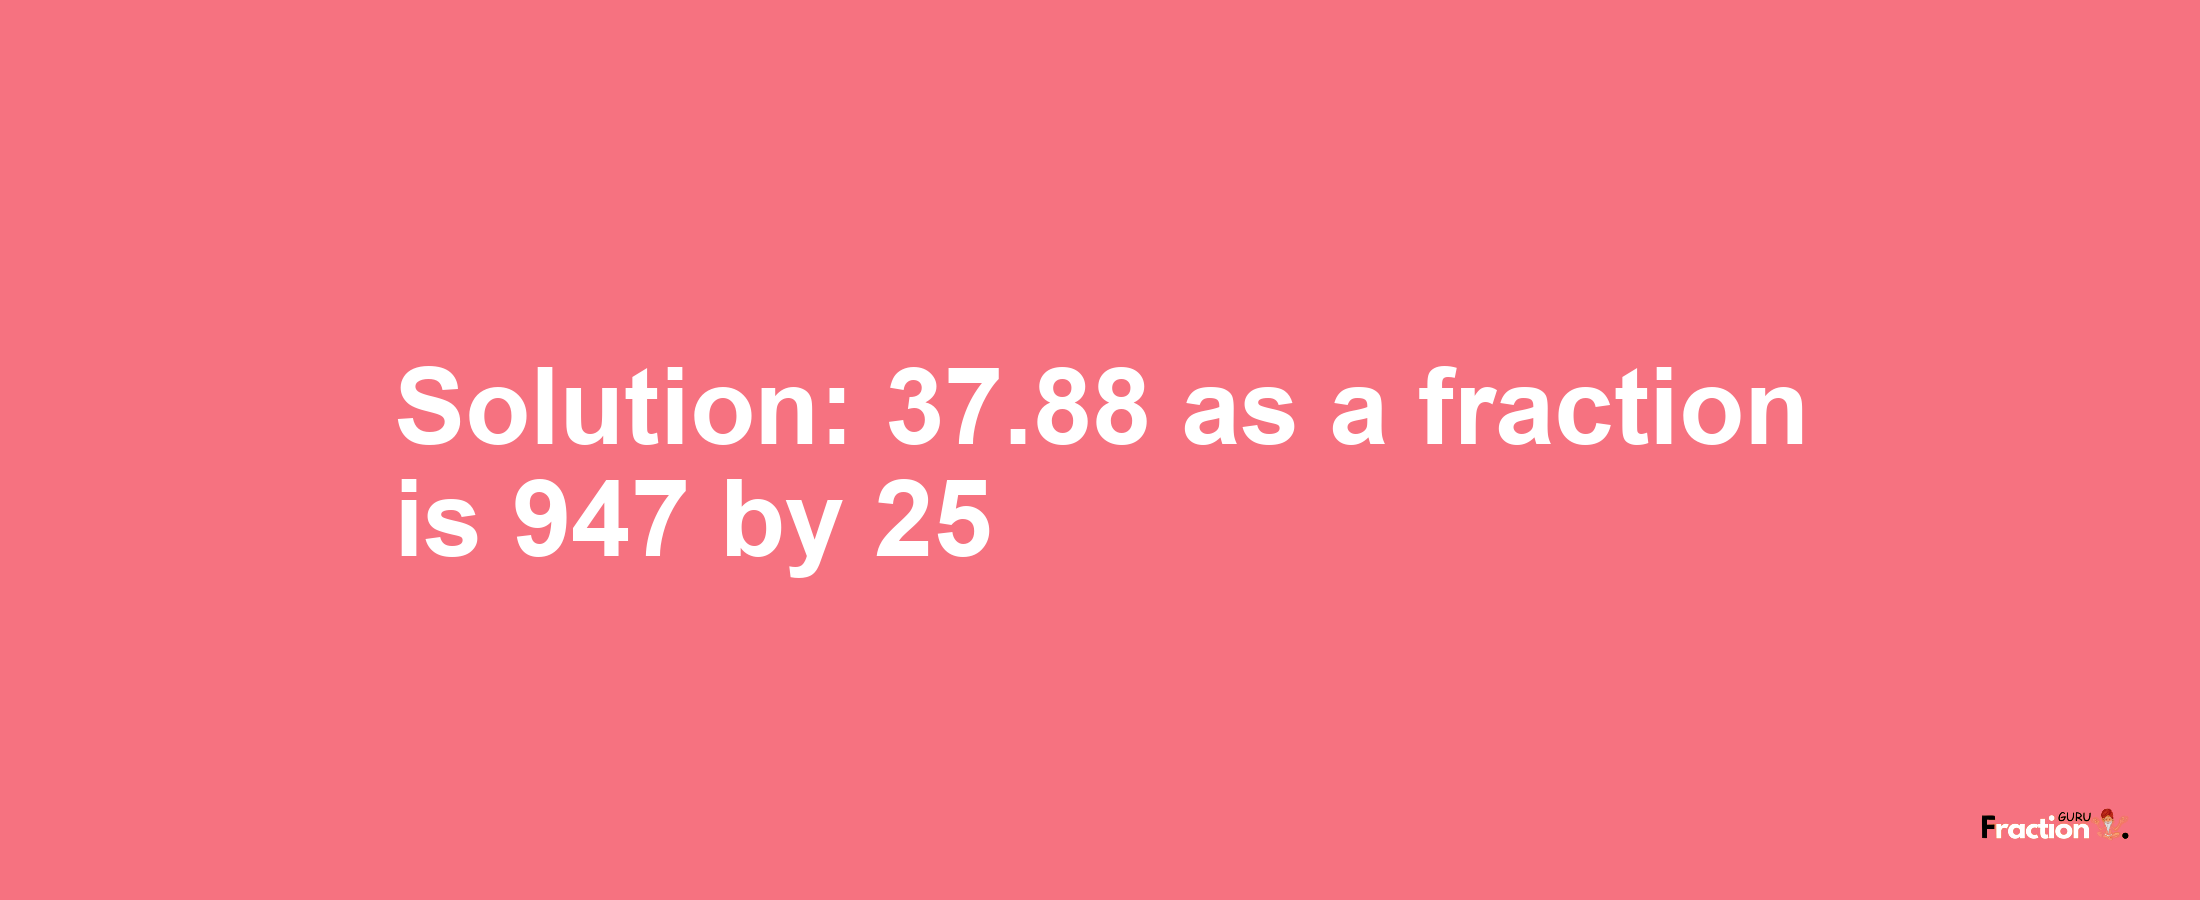 Solution:37.88 as a fraction is 947/25